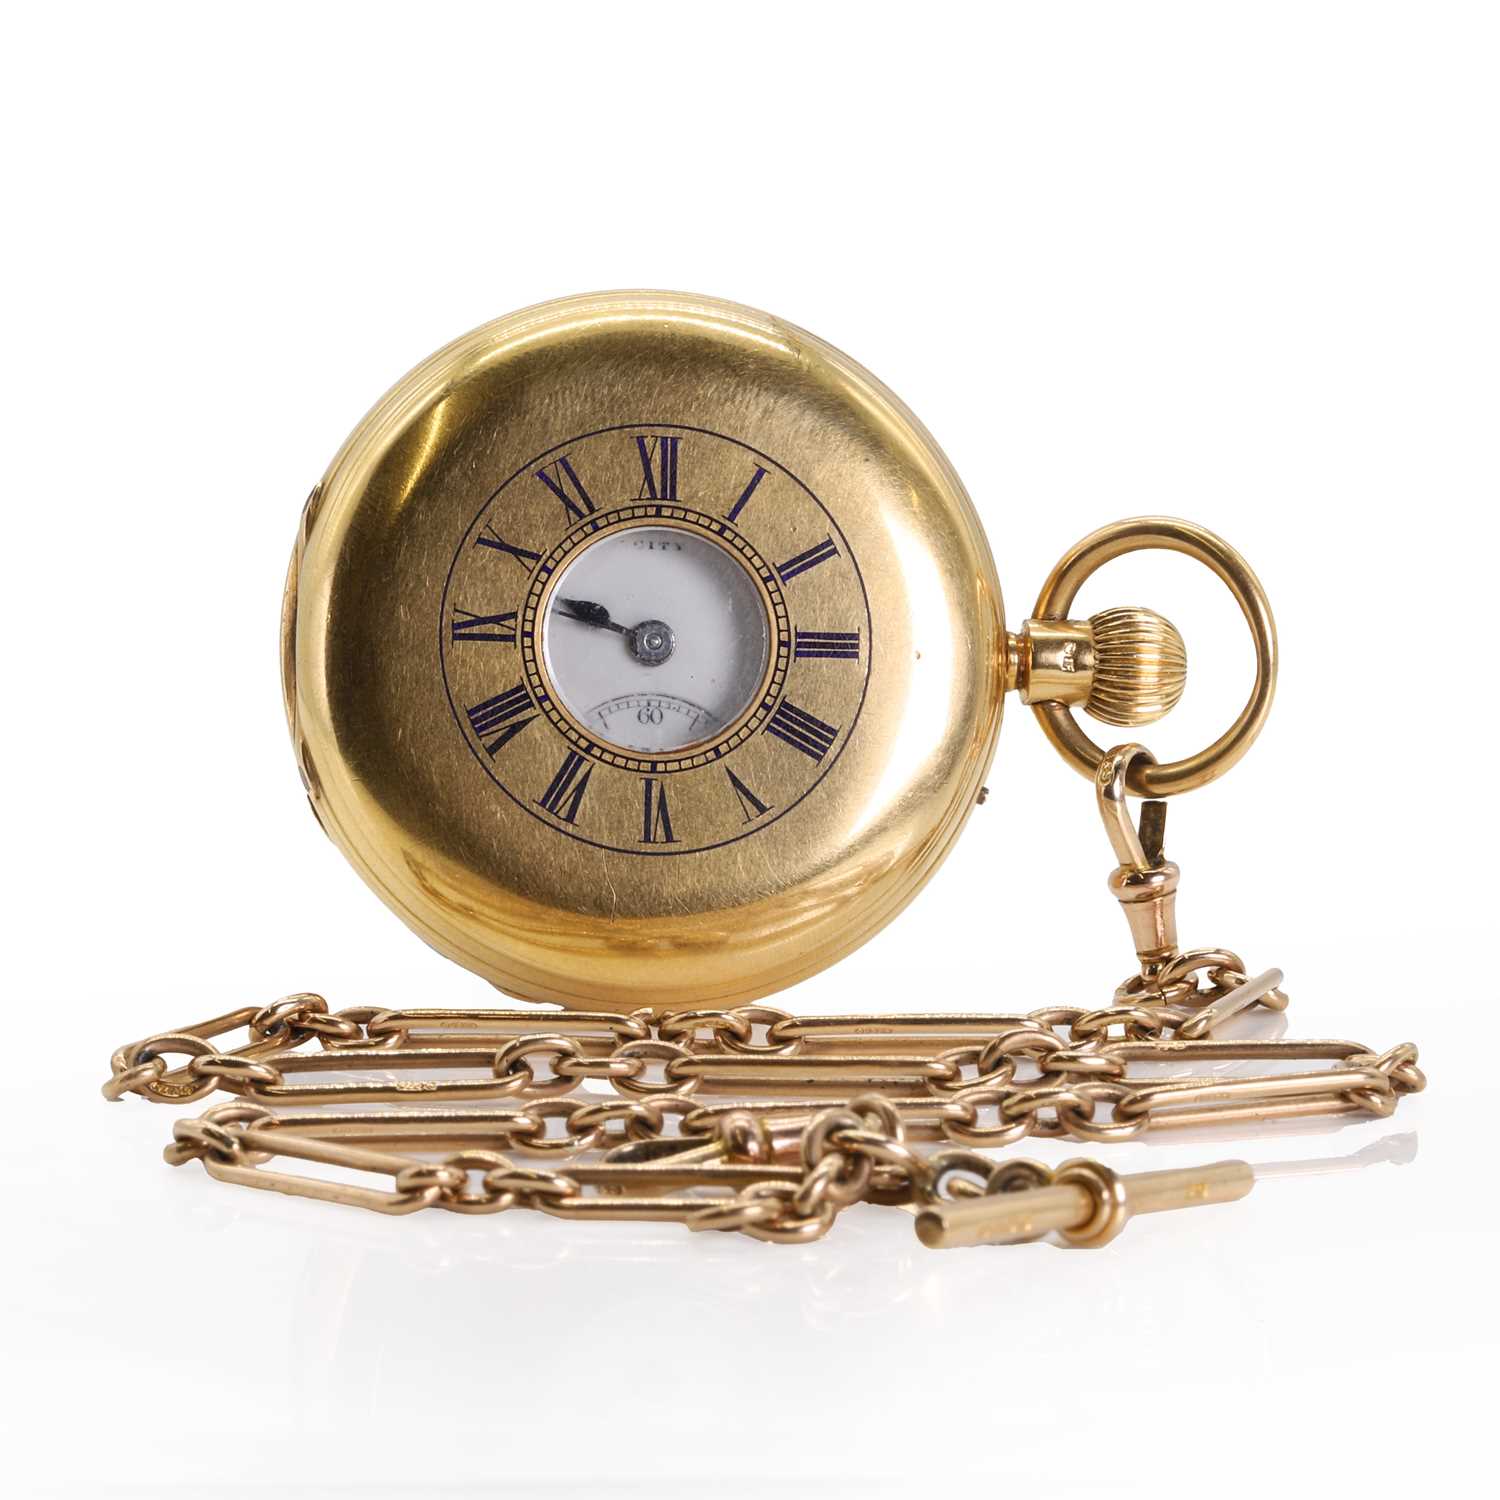 Lot 312 - An 18ct gold side wind half hunter pocket watch, by Langford